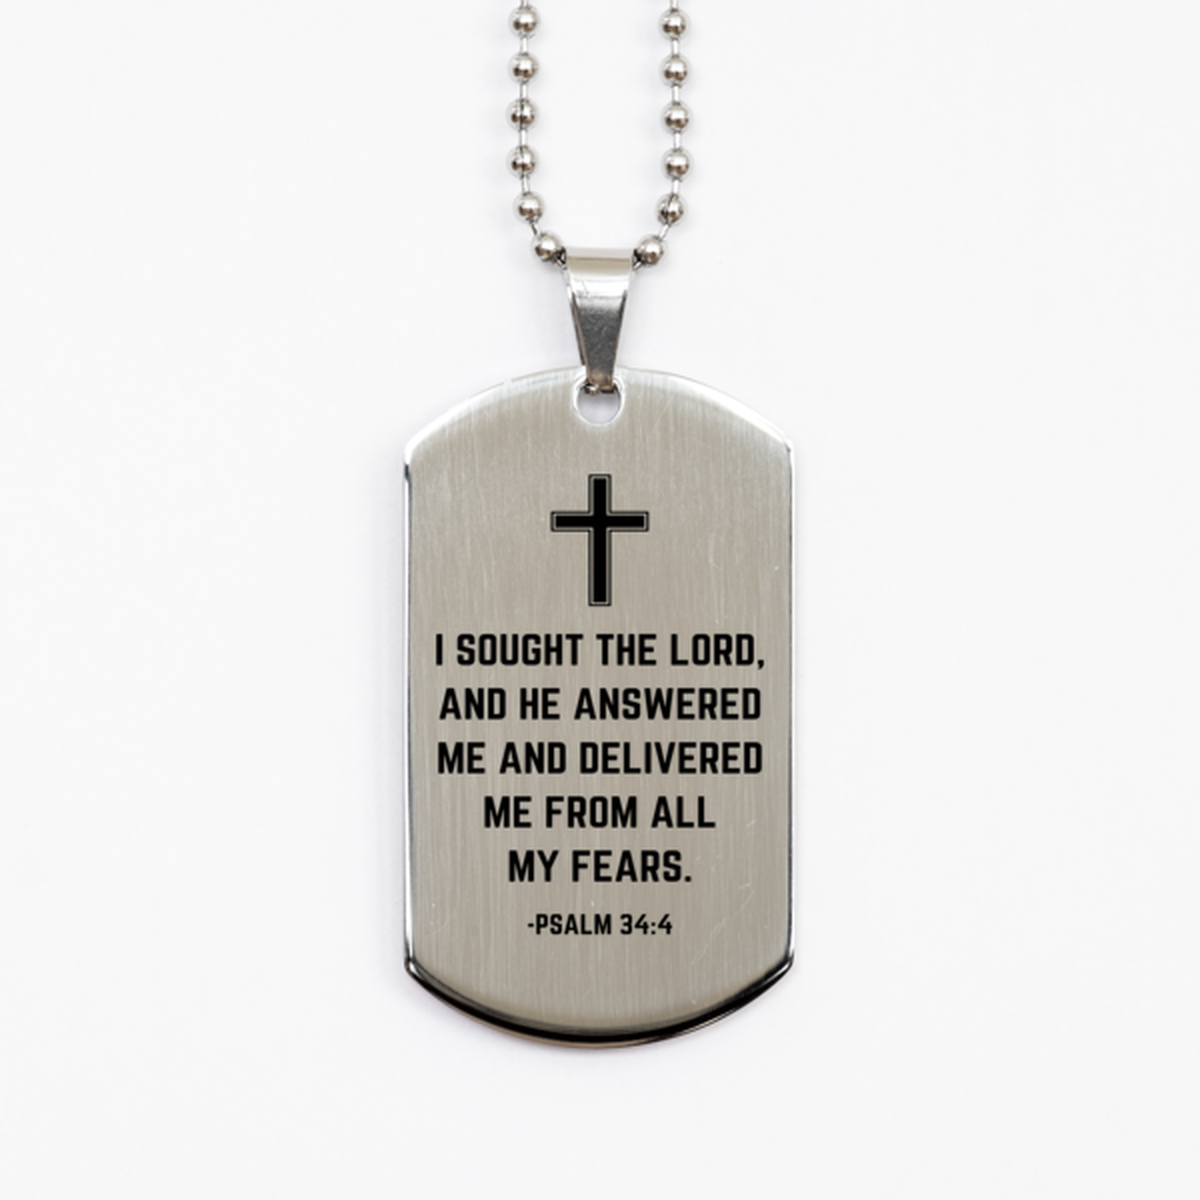 Baptism Gifts For Teenage Boys Girls, Christian Bible Verse Silver Dog Tag, I sought the Lord, Confirmation Gifts, Bible Verse Necklace for Son, Godson, Grandson, Nephew